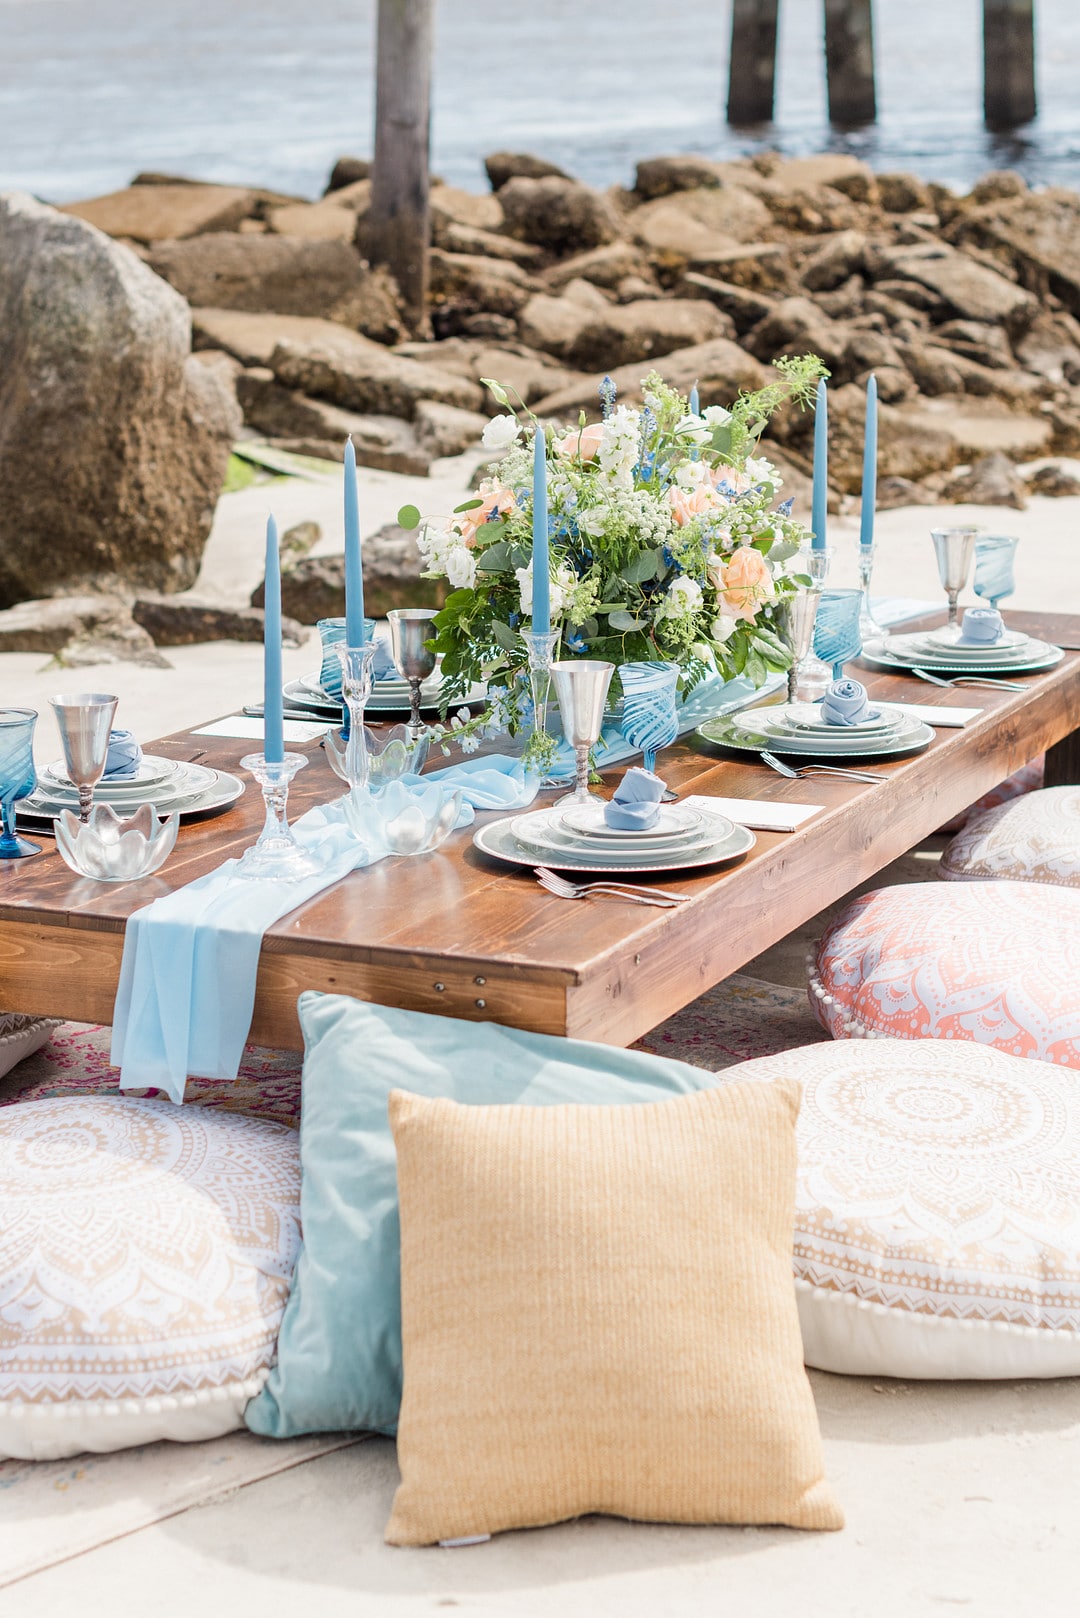 the table set up with pillows surrounding for the amelia island beach wedding inspiration shoot